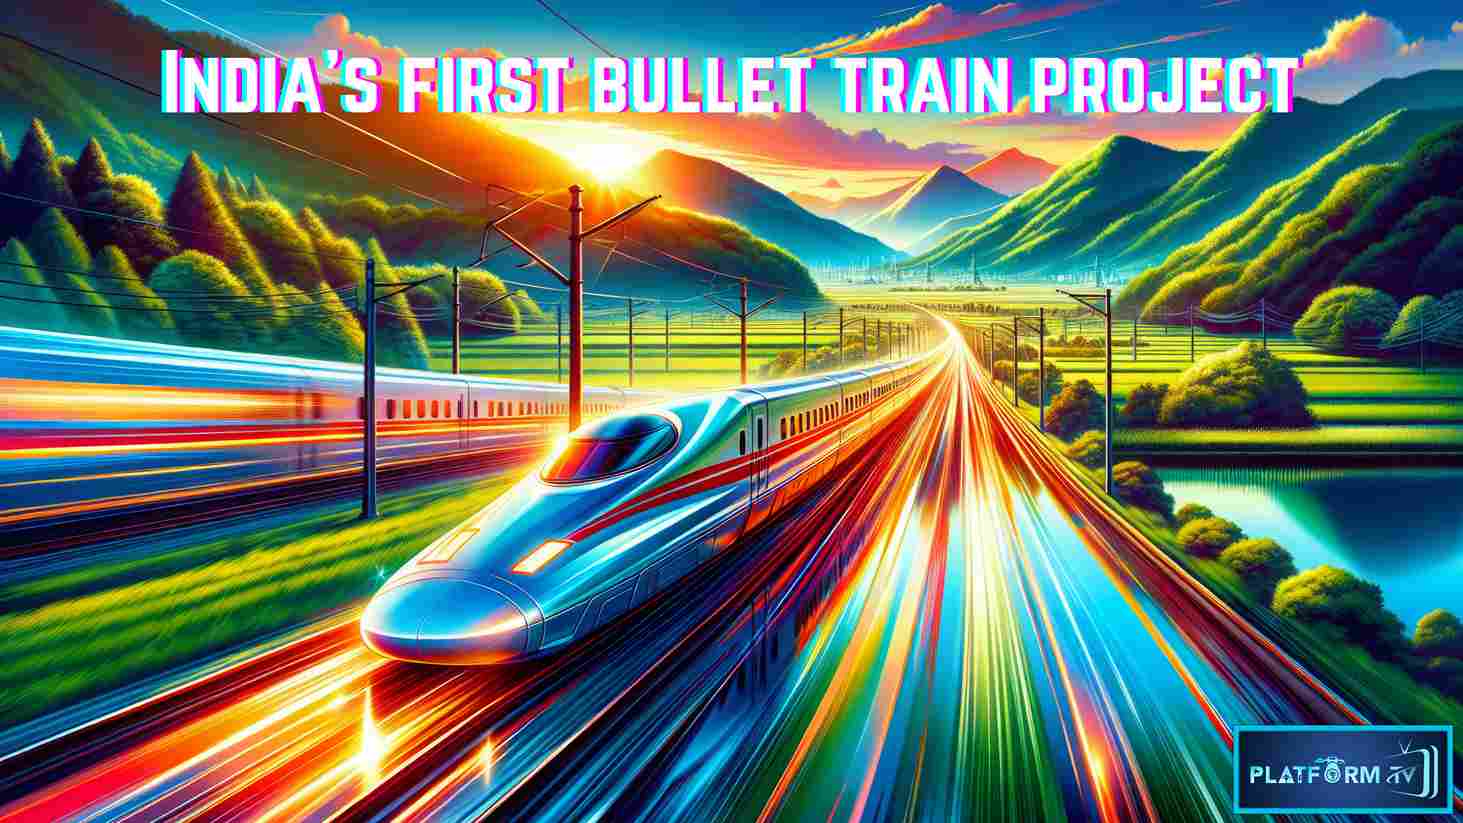 India's First Bullet Train Project - Platform Tamil